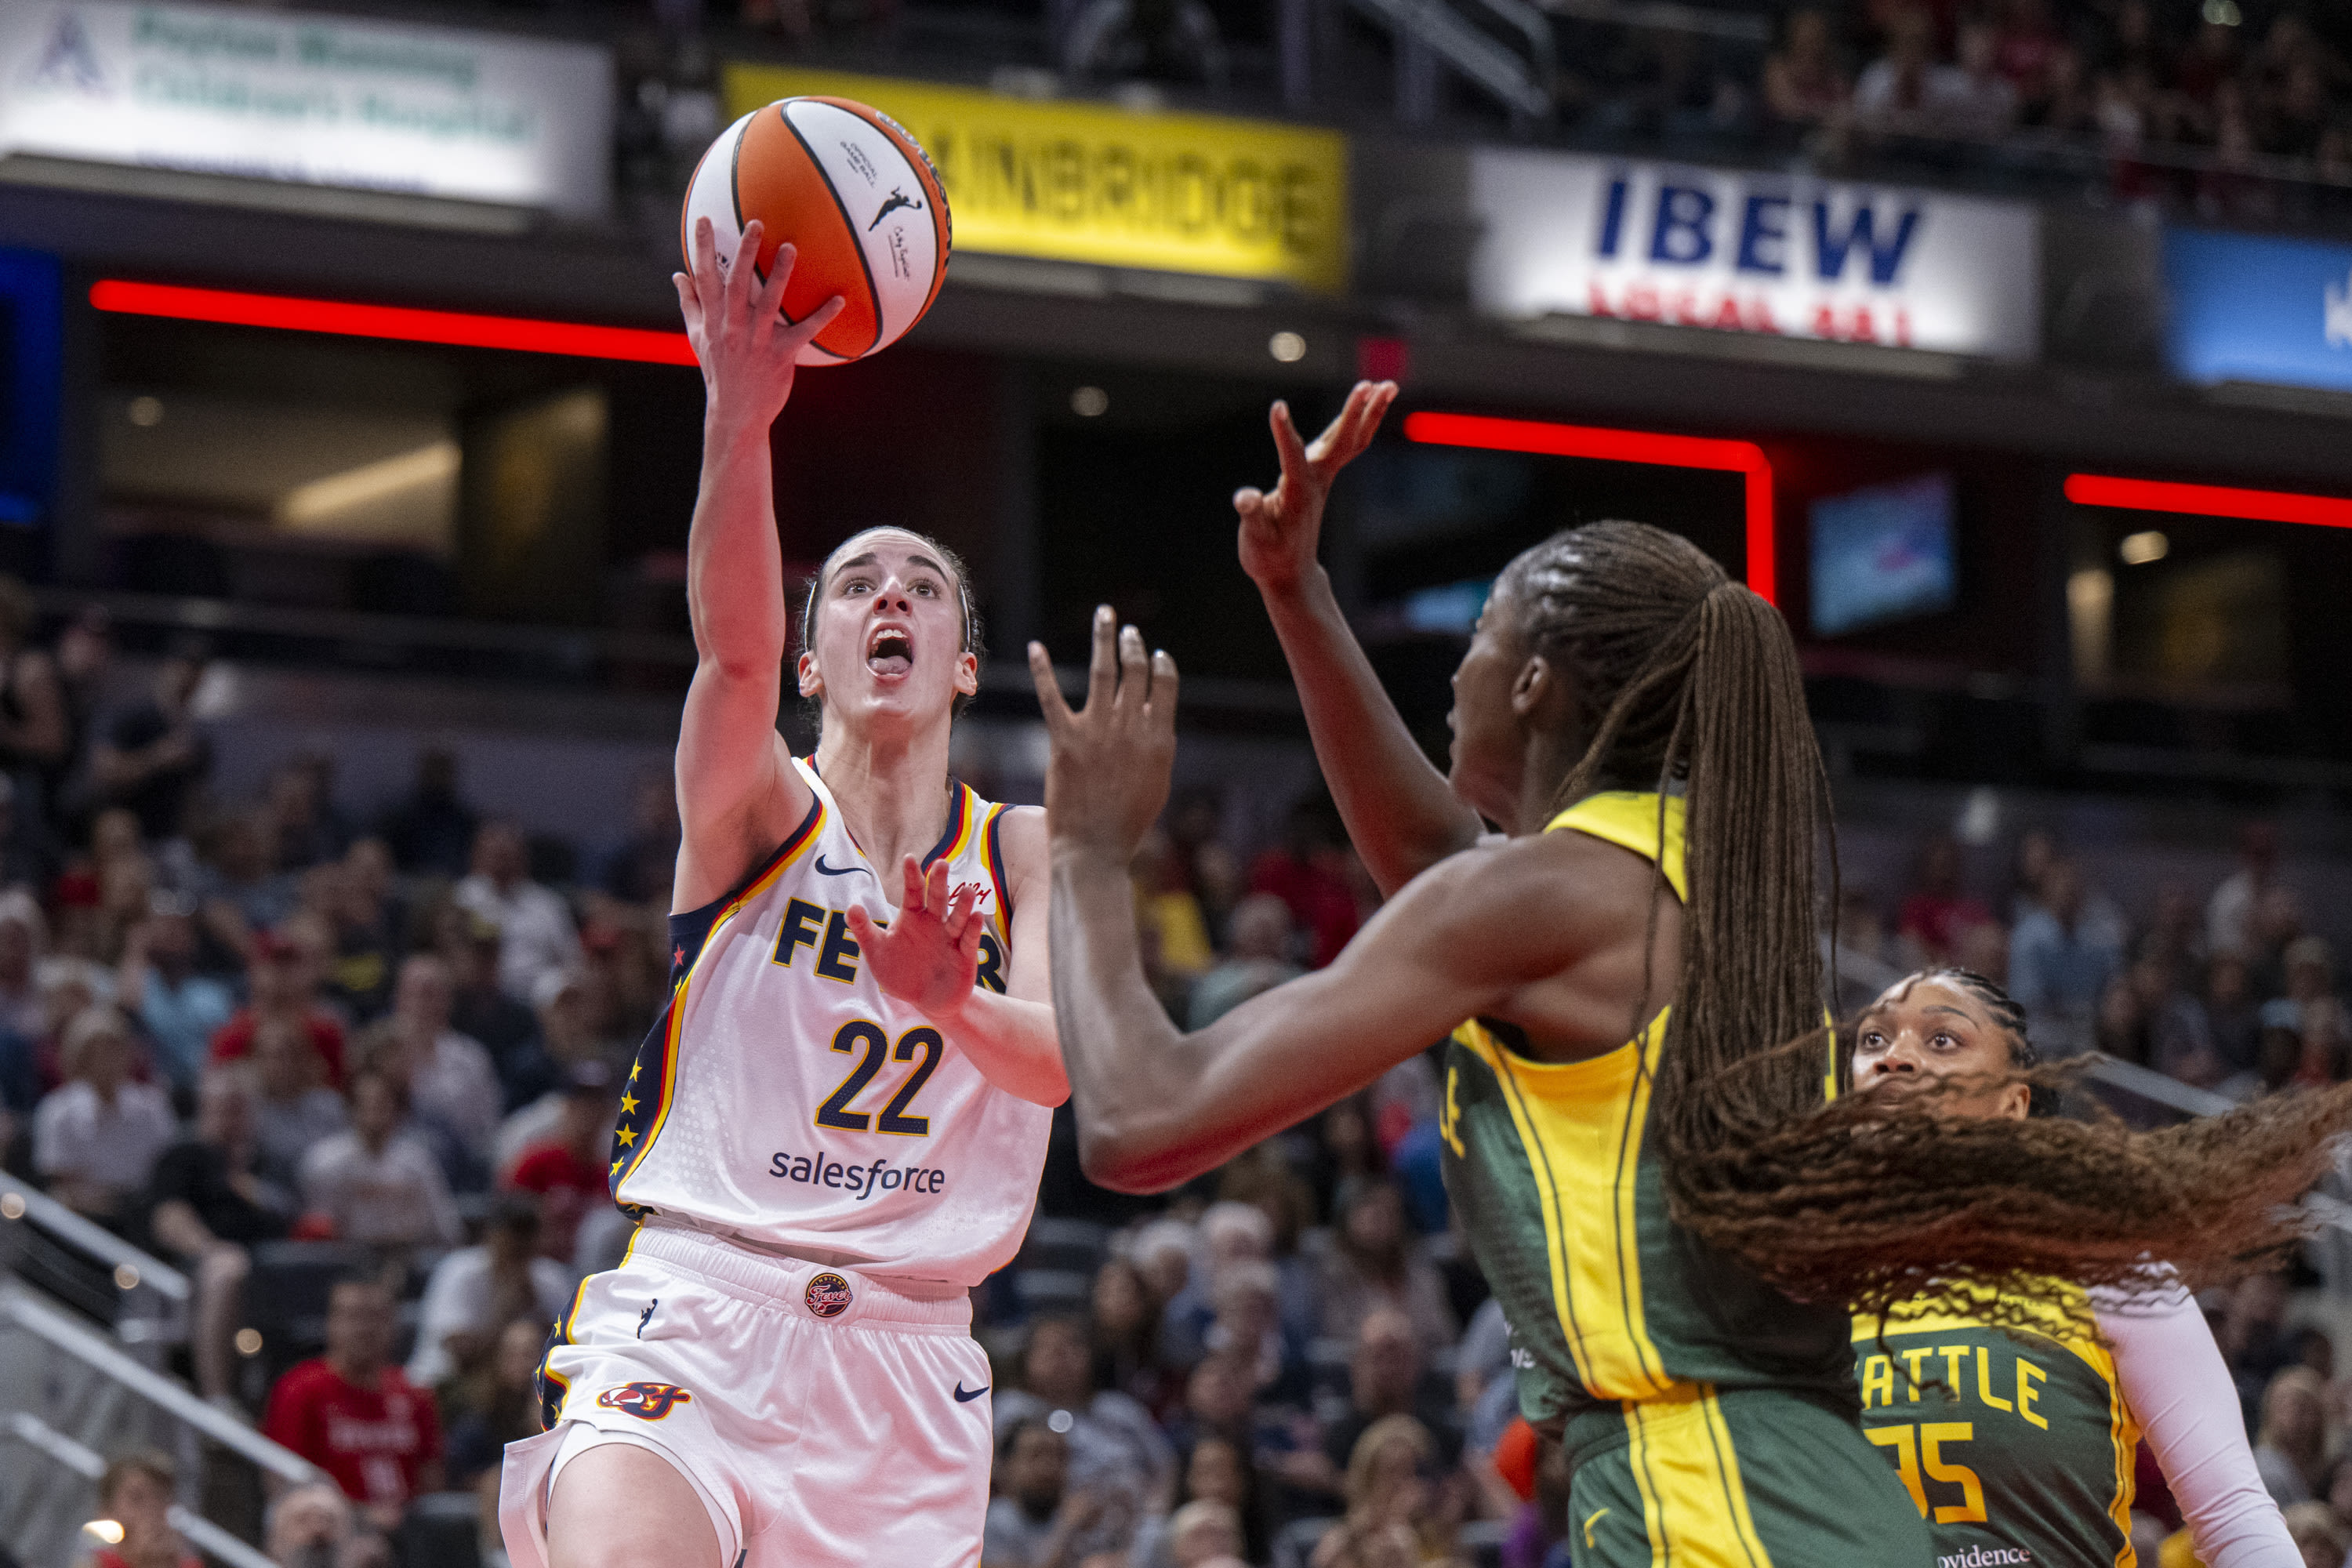 Clark plays nearly entire game, scores 20 points, but Loyd gets 22 to lead Storm over Fever 103-88